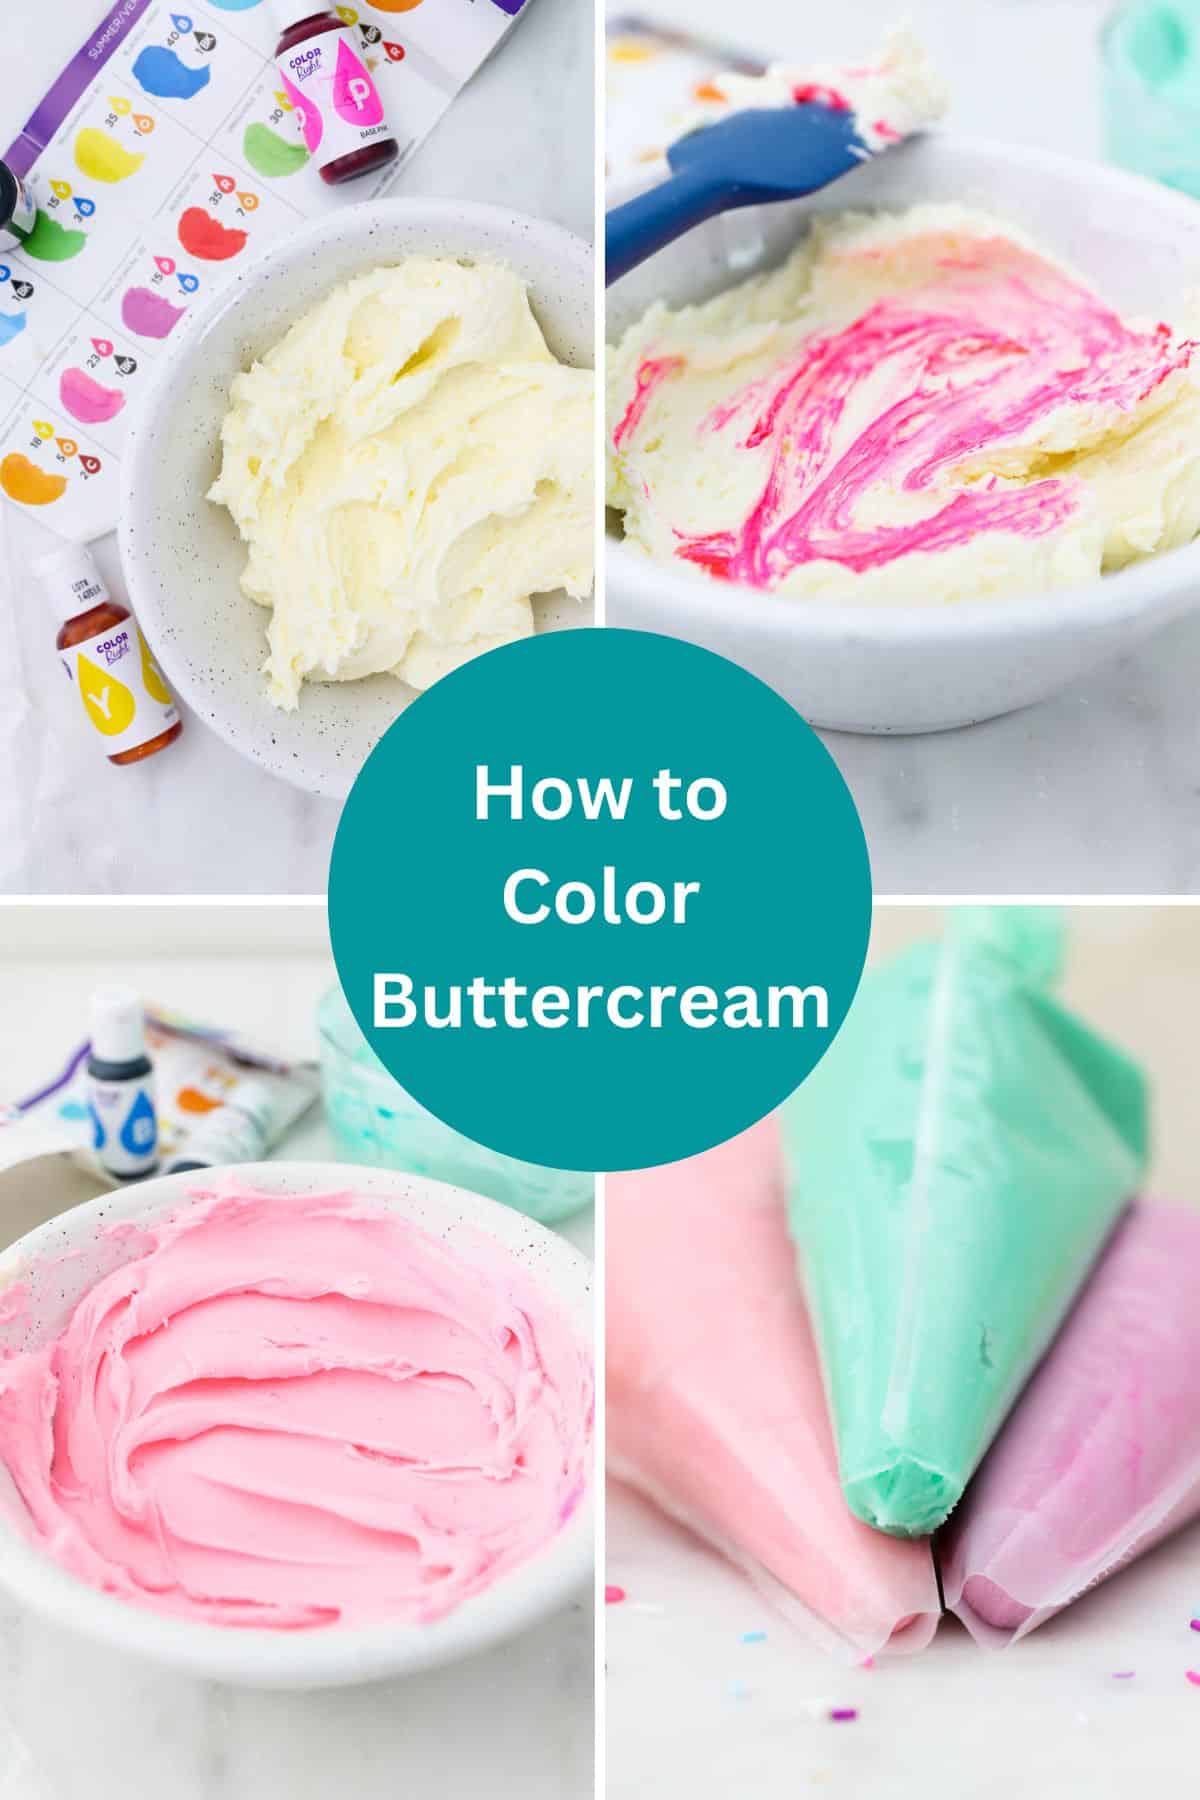 Pinterest collage image showing the step to coloring buttercream with text overlay "How to Color Buttercream"